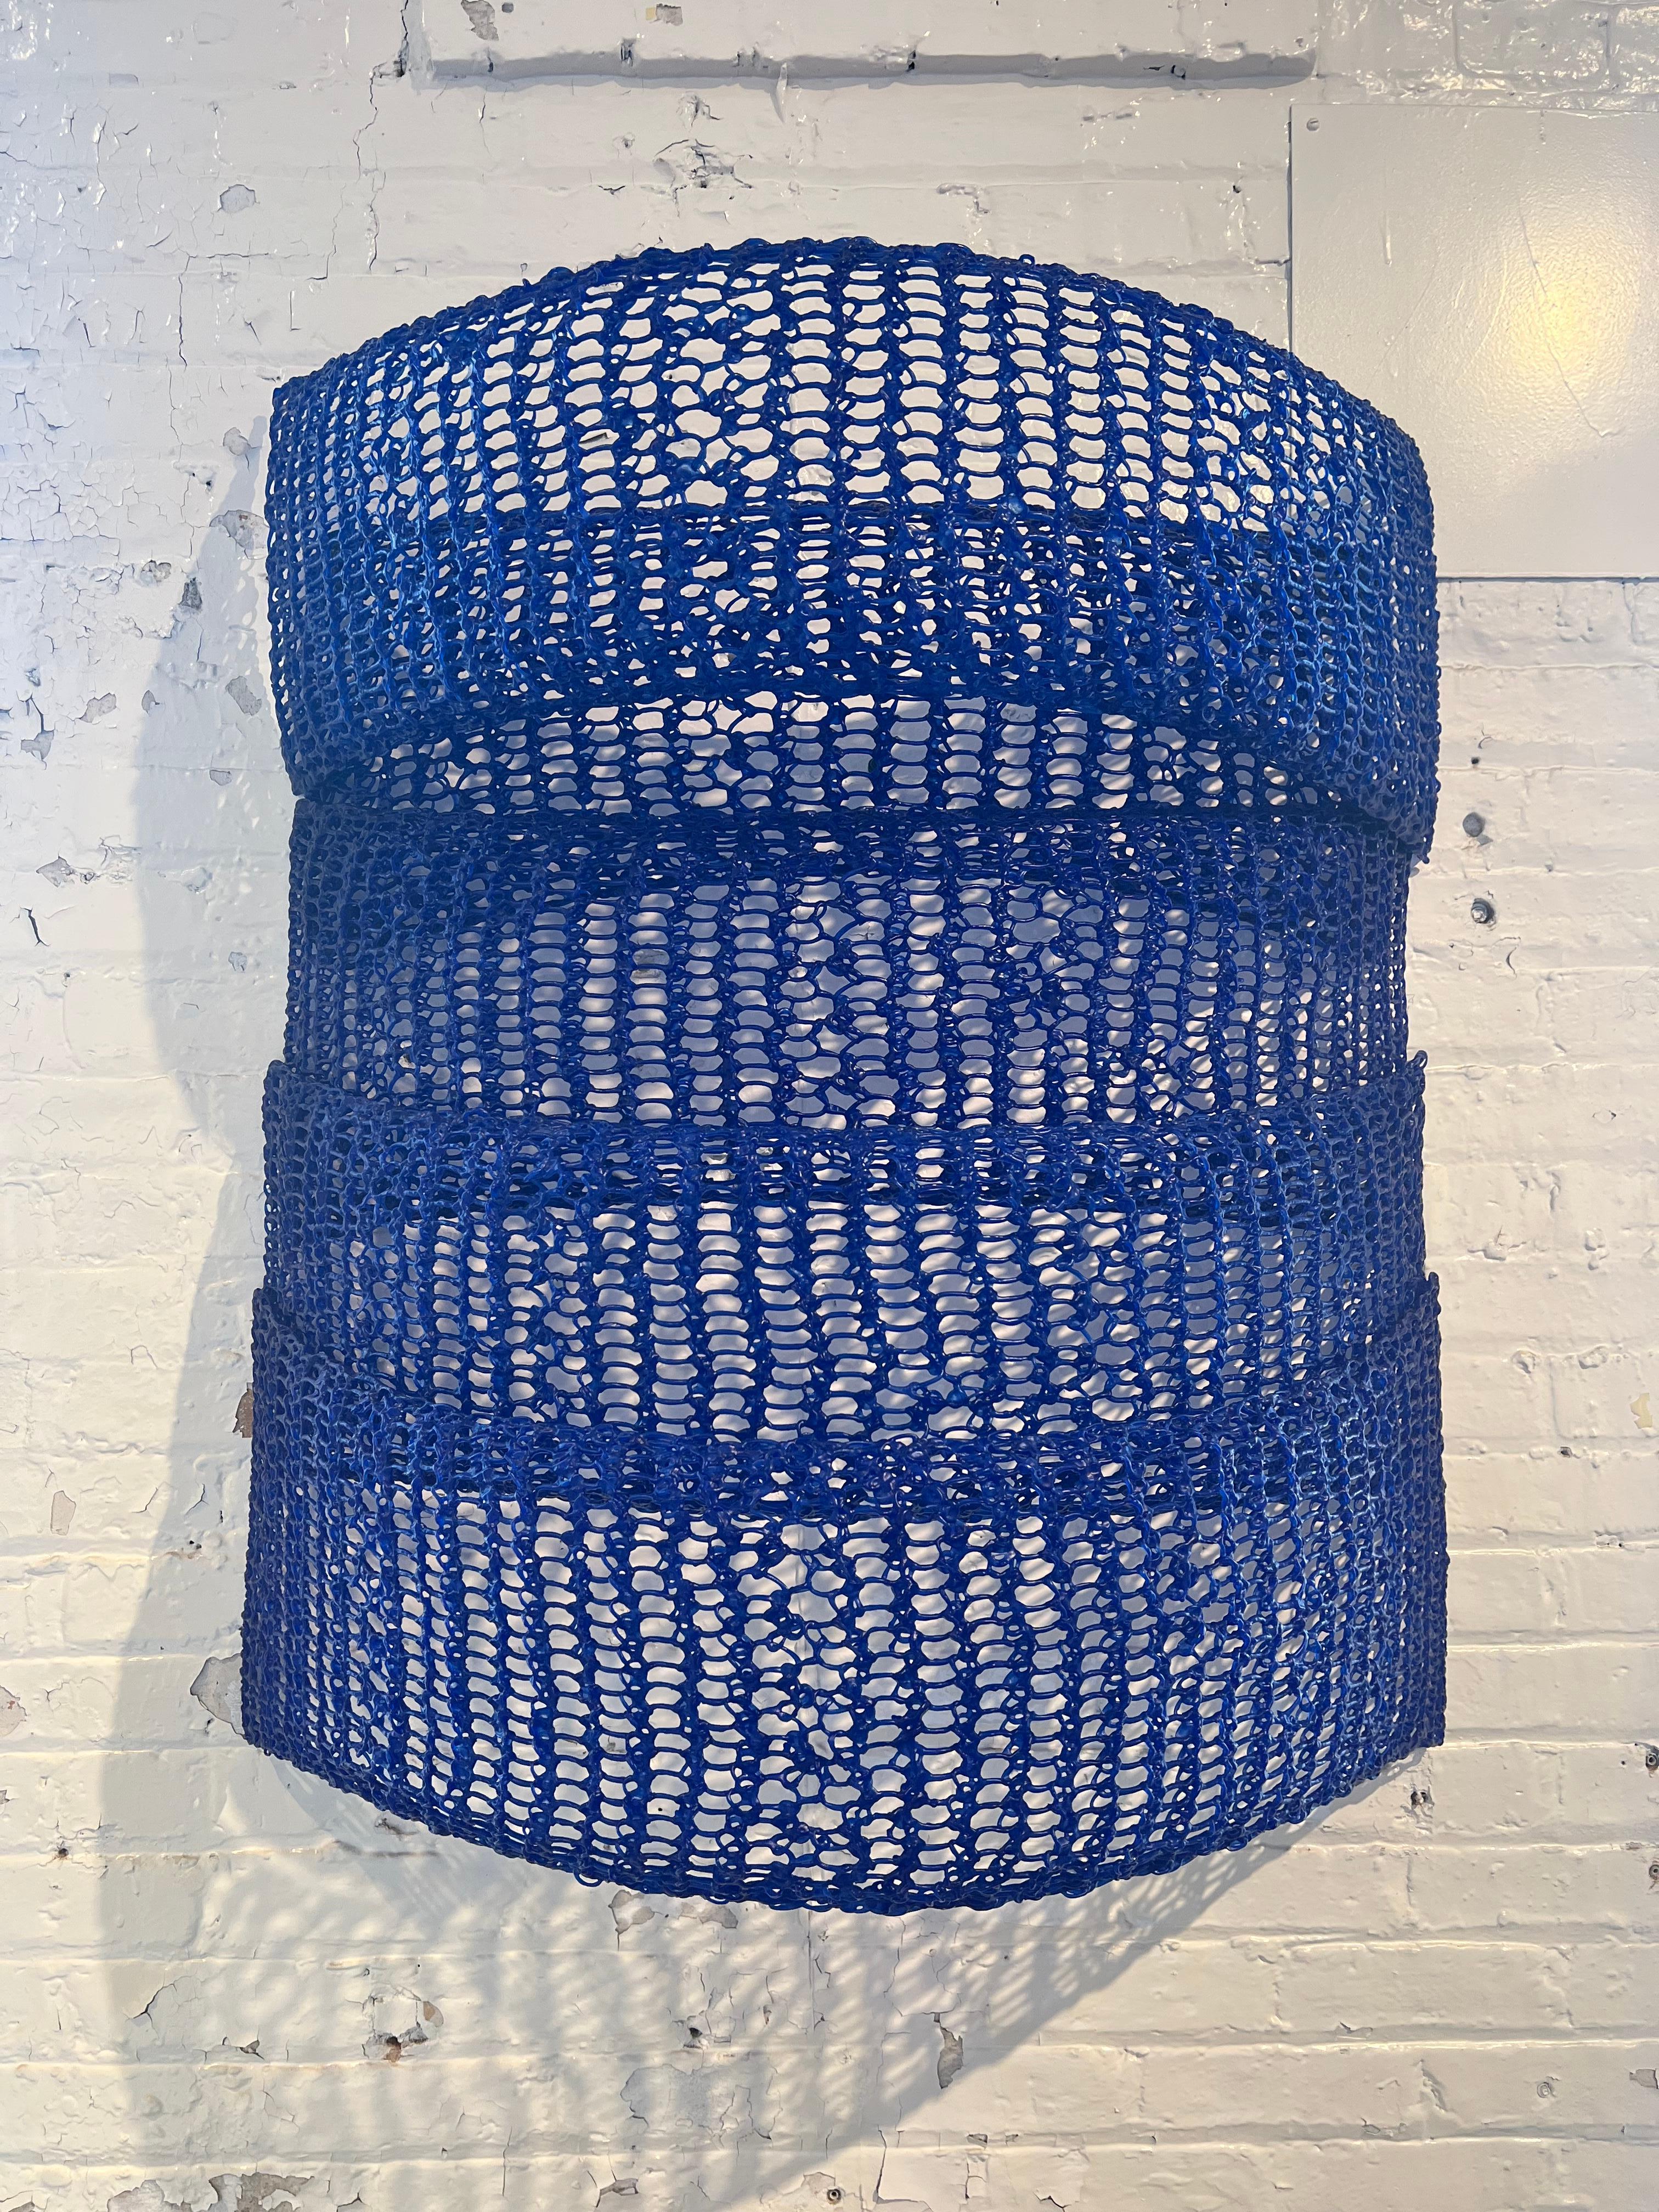 Contemporary hand crocheted fiberglass with polyester resin wall sculpture by Yvette Kaiser Smith.